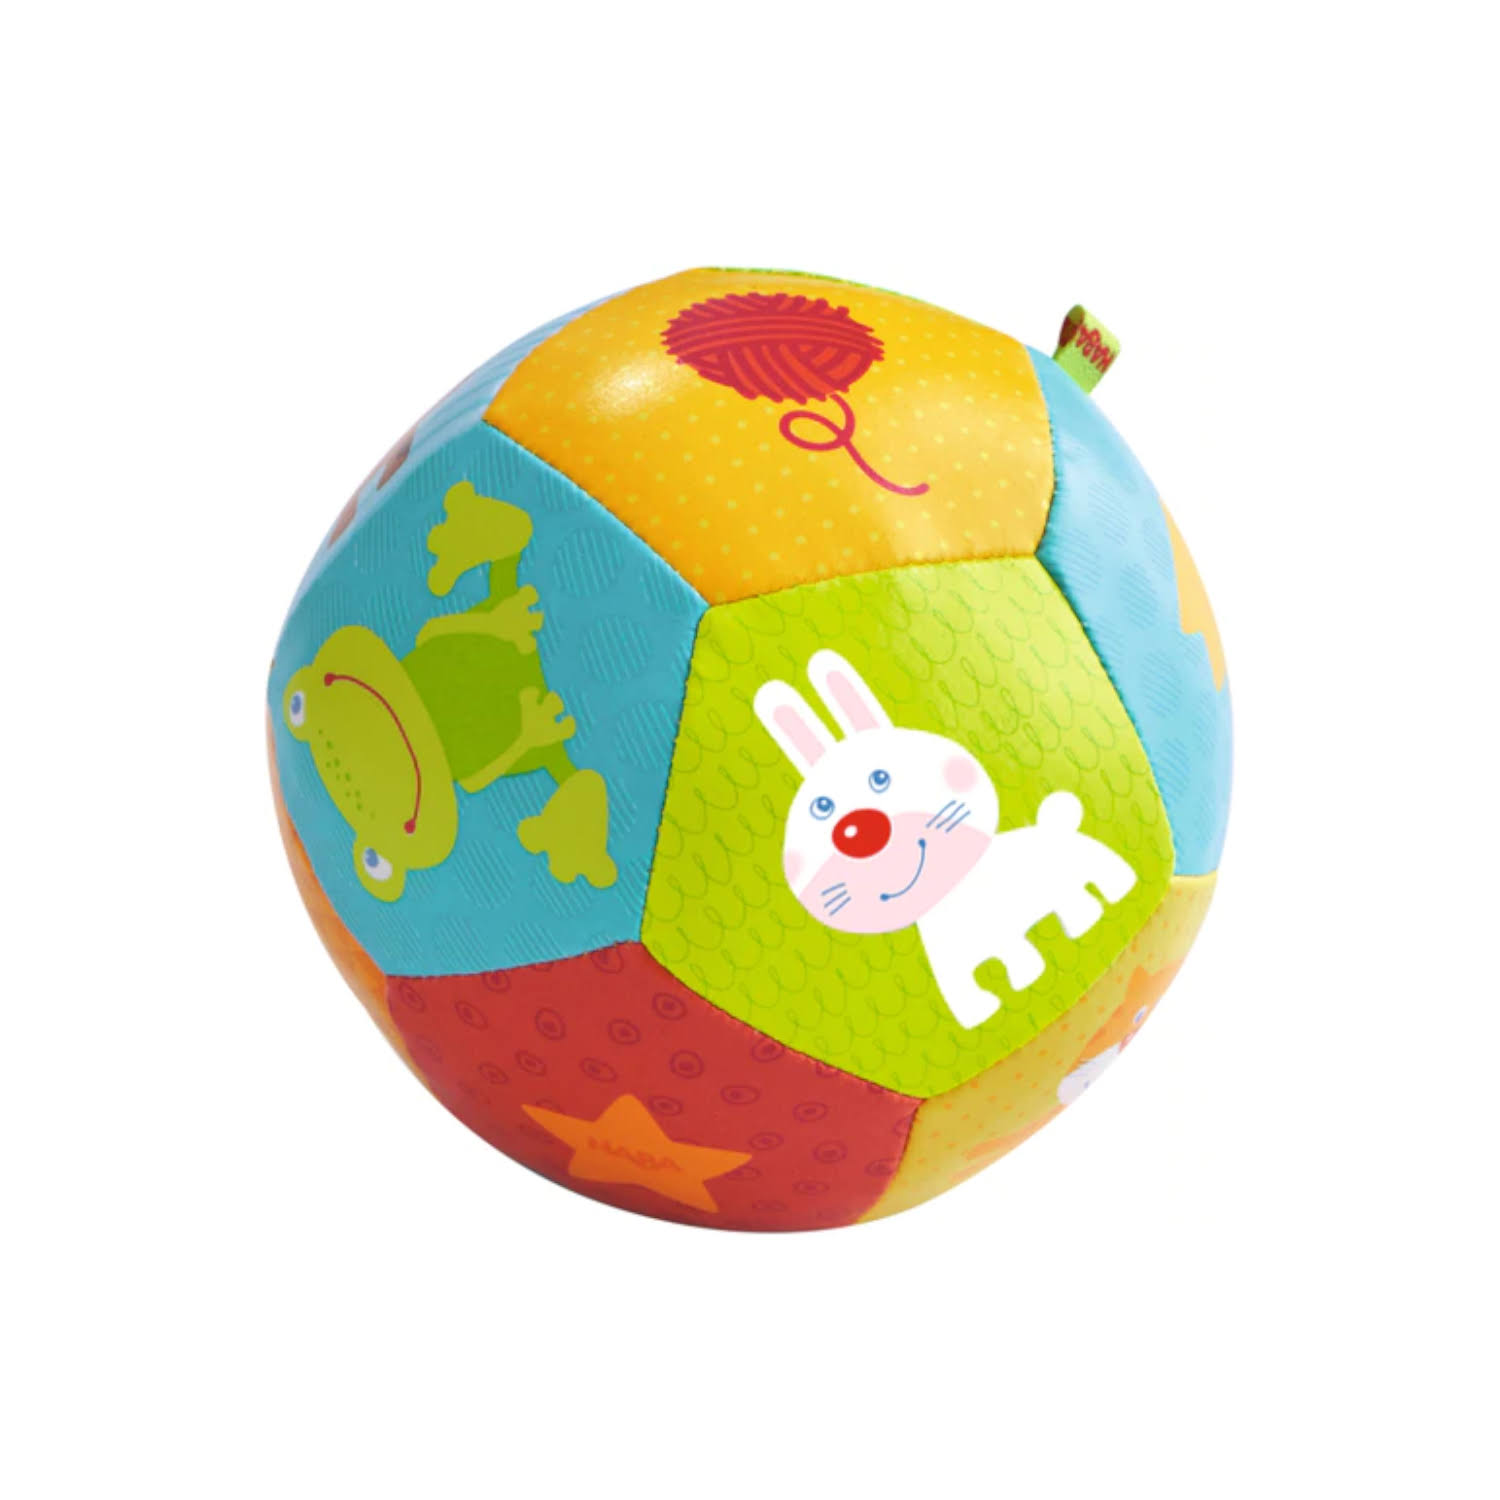 Haba Baby Ball Toy - Animal Friends, 4 1/2"